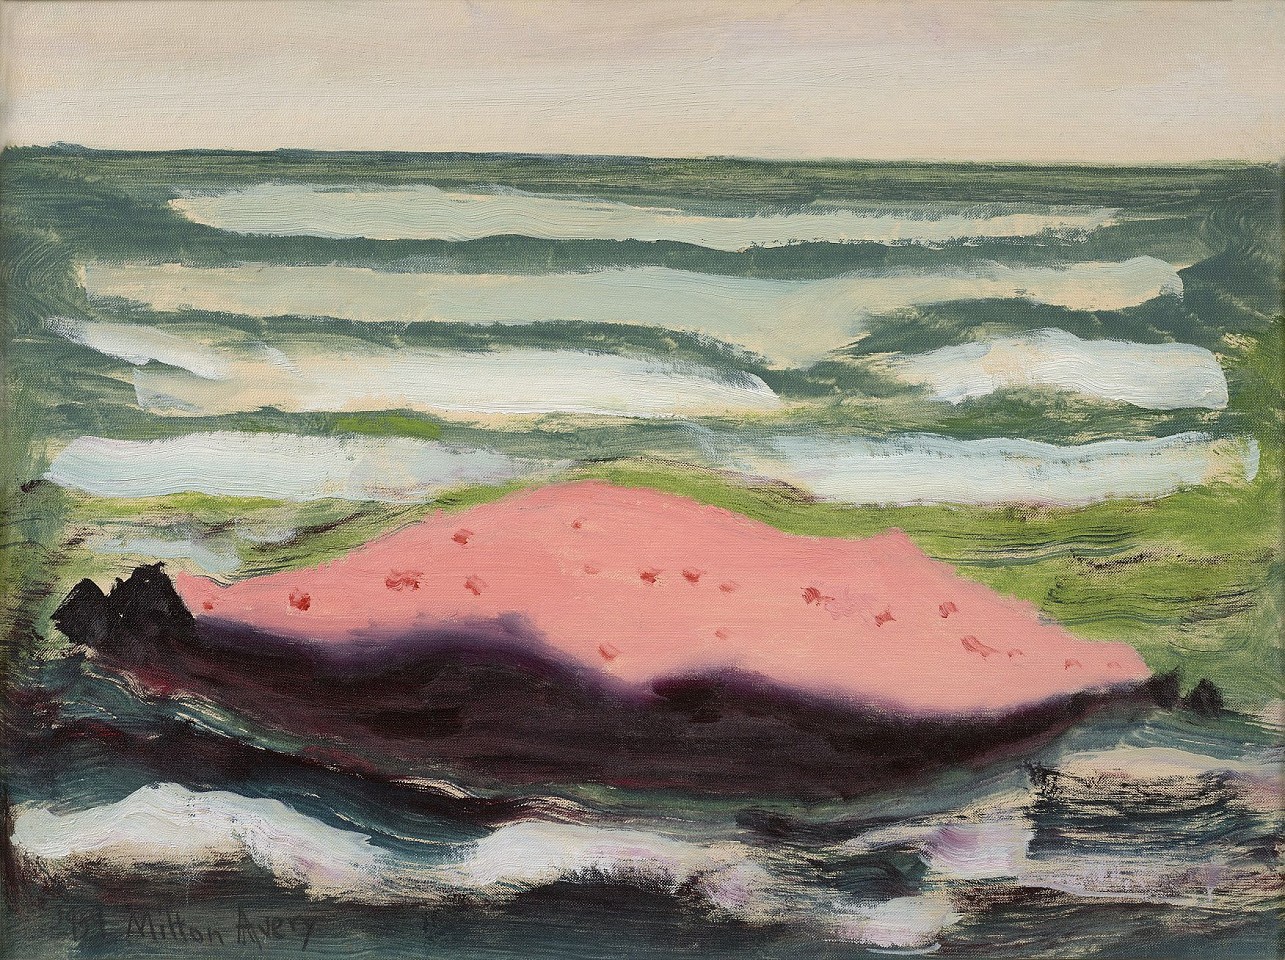 Milton Avery, Pink Island, White Waves, 1959
oil on canvasboard, 18 x 24 in. (45.7 x 61 cm)
MA221201